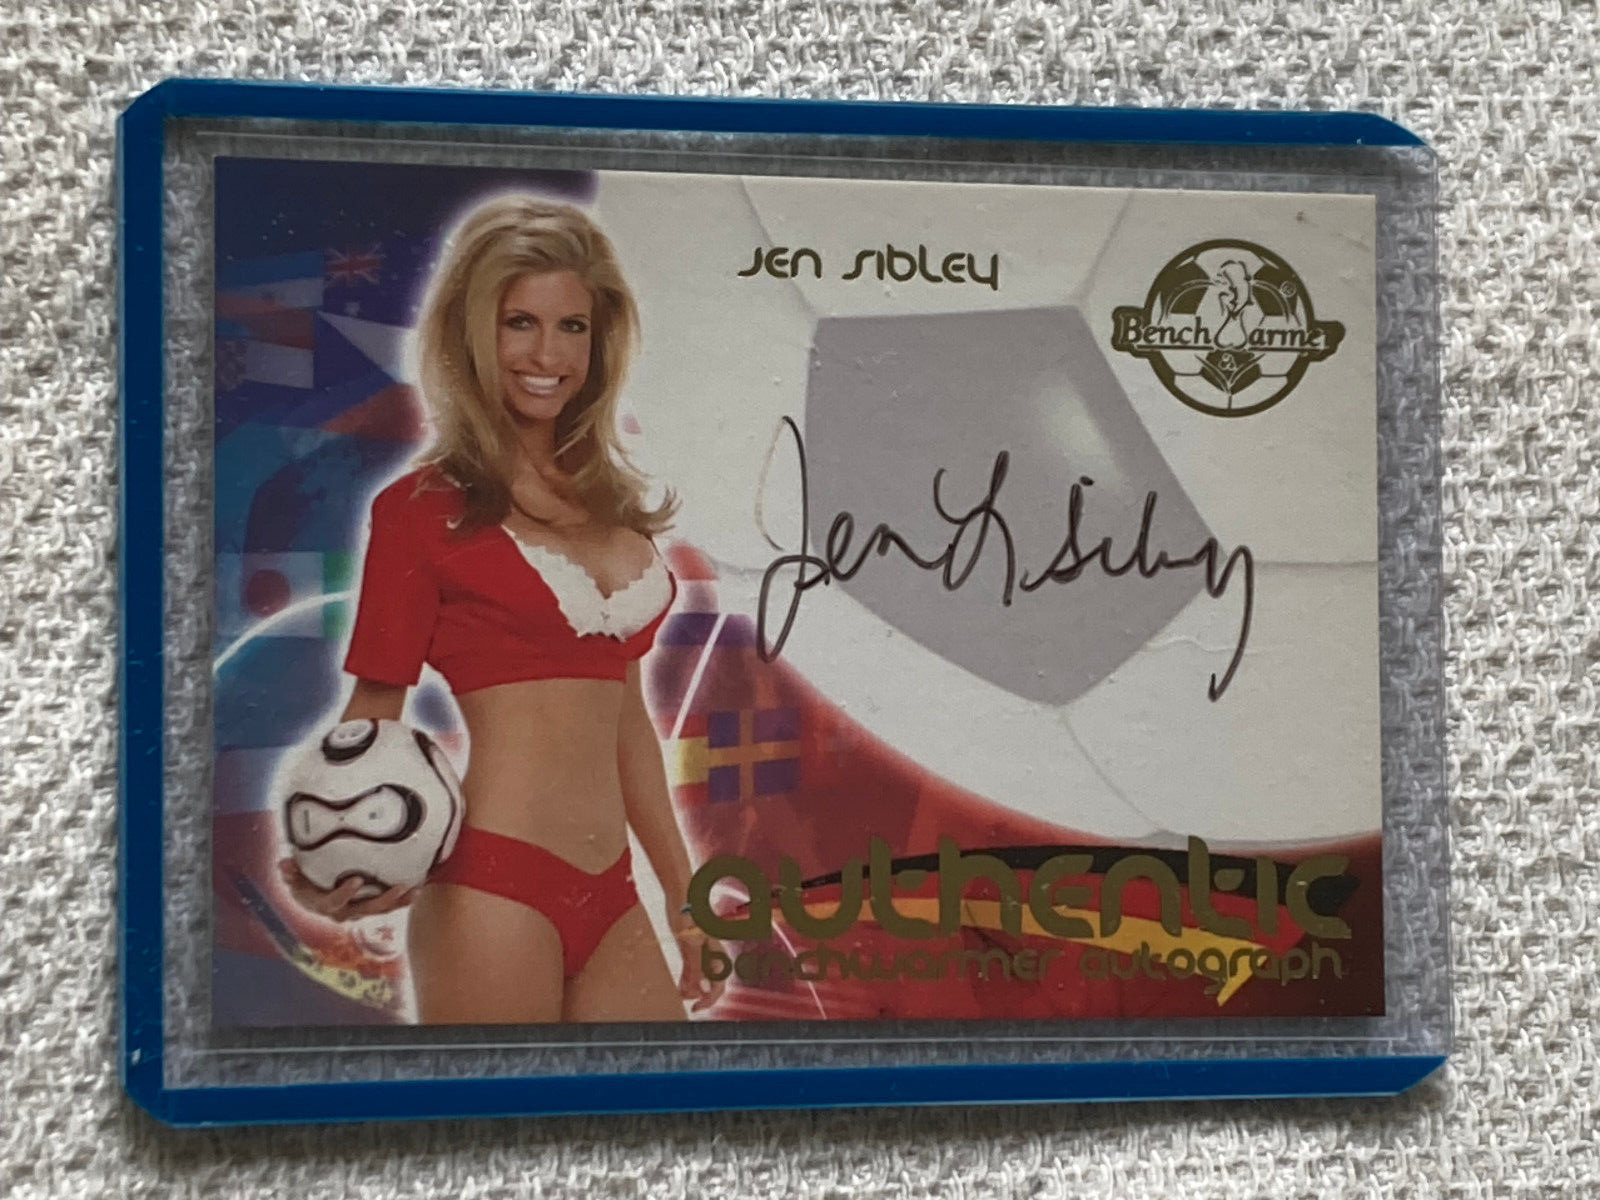 2006 Bench Warmer World Cup Soccer Autograph #19 Jen Sibley NM